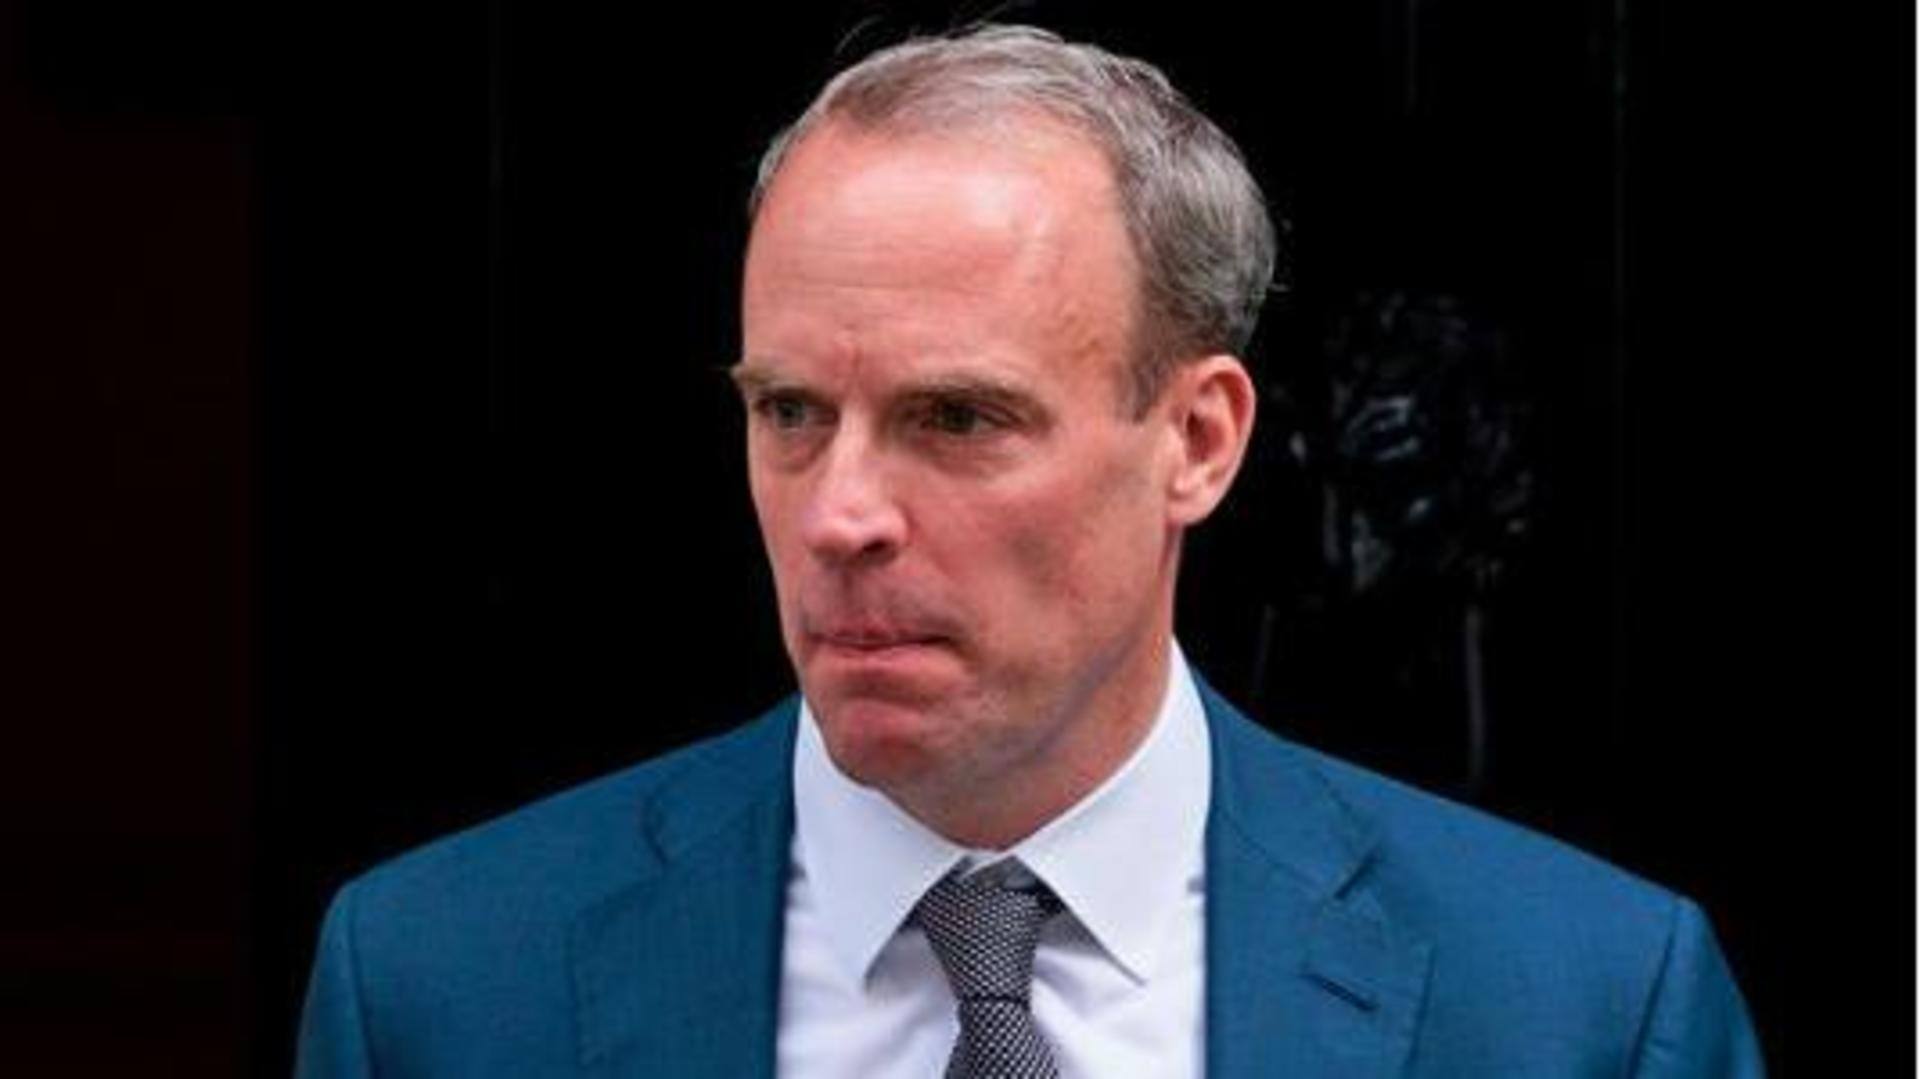 UK: Deputy PM Dominic Raab resigns after bullying investigation